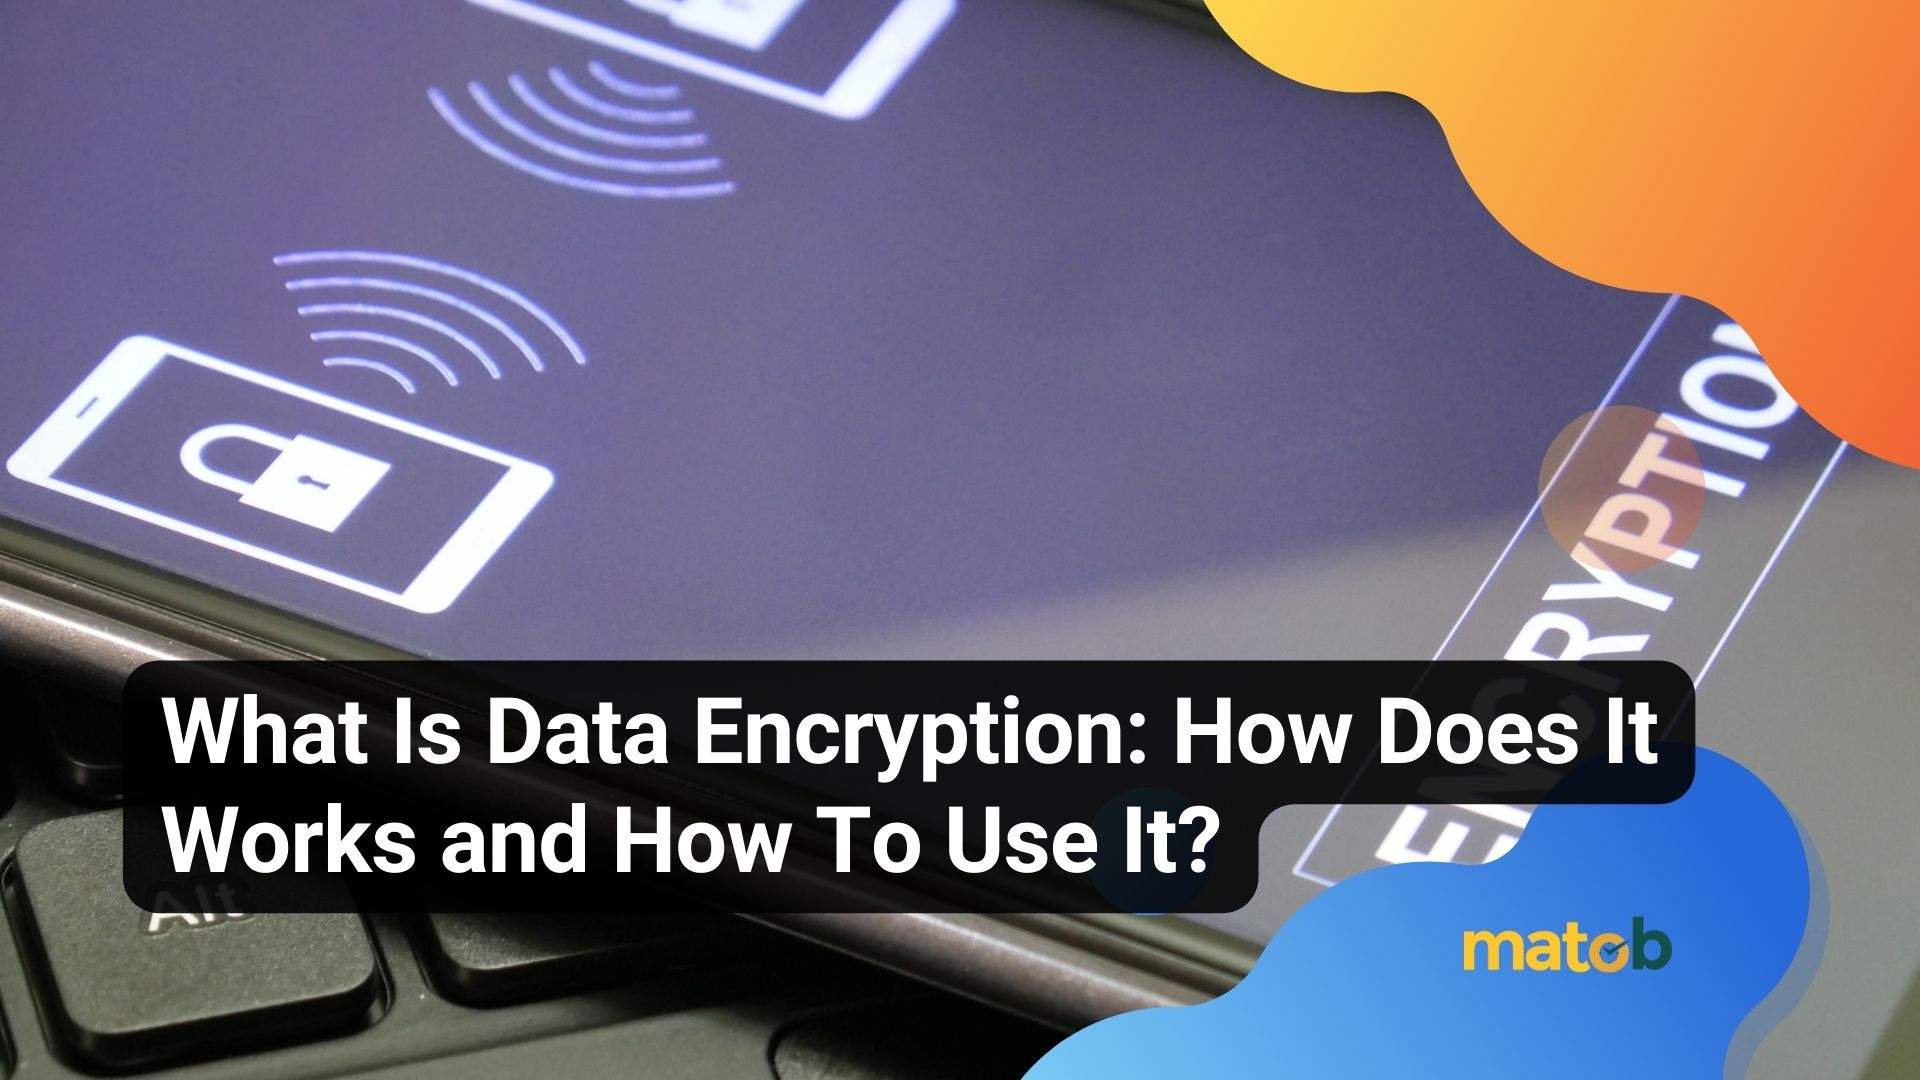 What Is Data Encryption: How Does It Works and How To Use It?